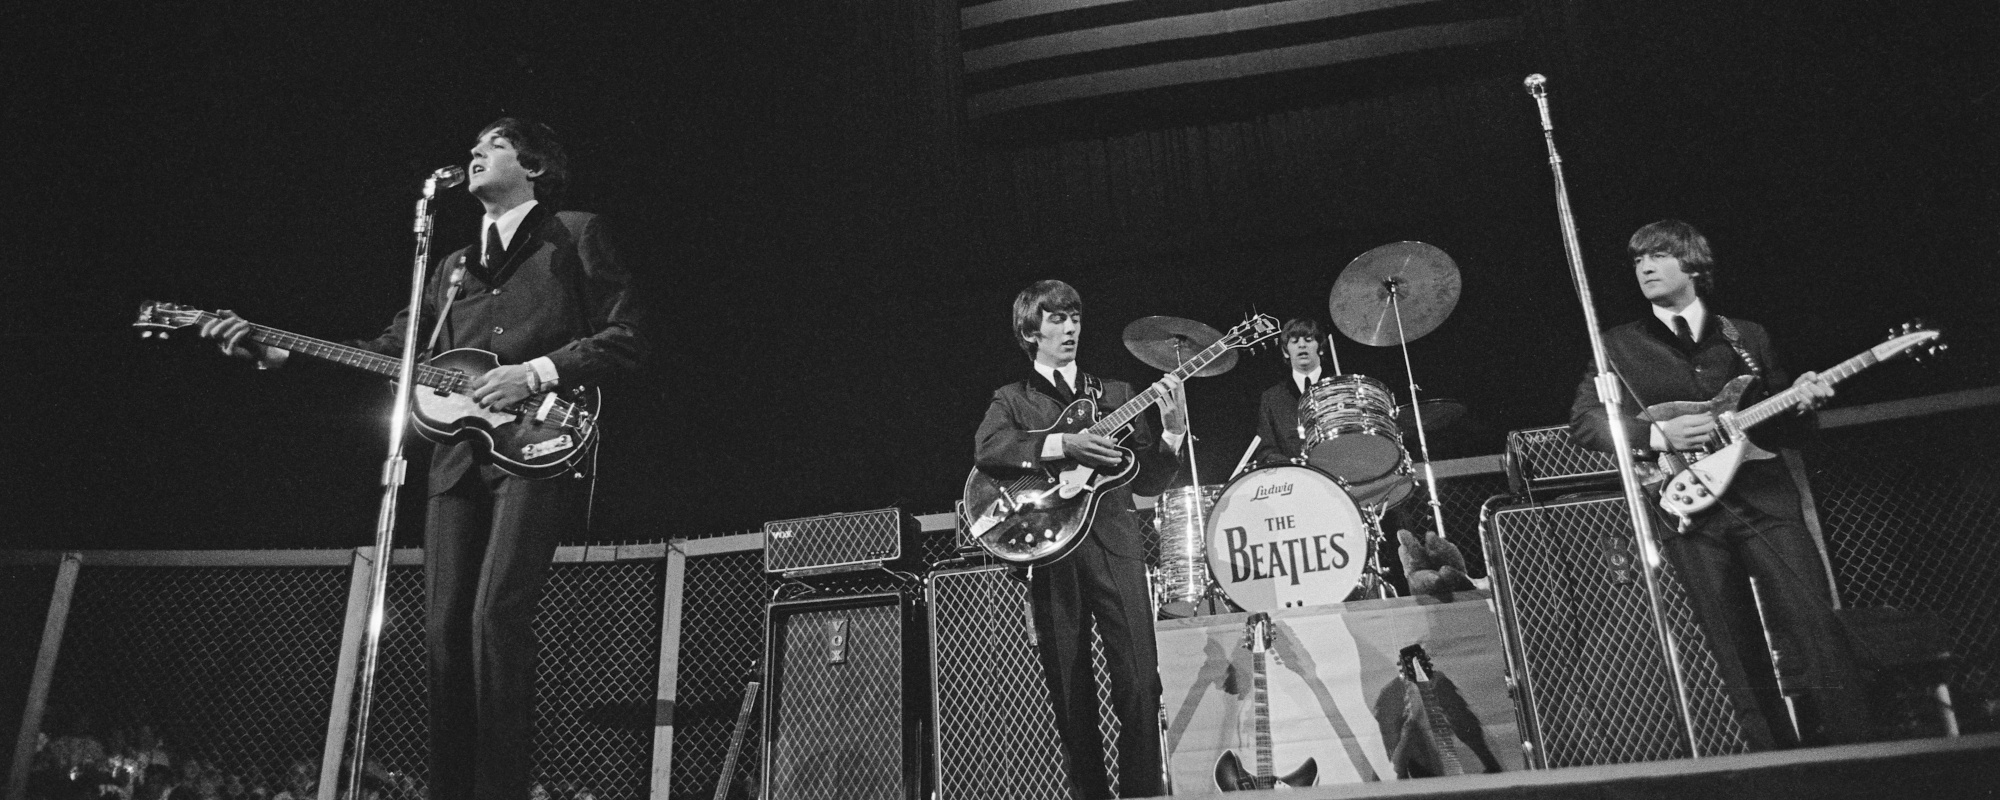 10 Notable R&B Songs that Were Covered by The Beatles